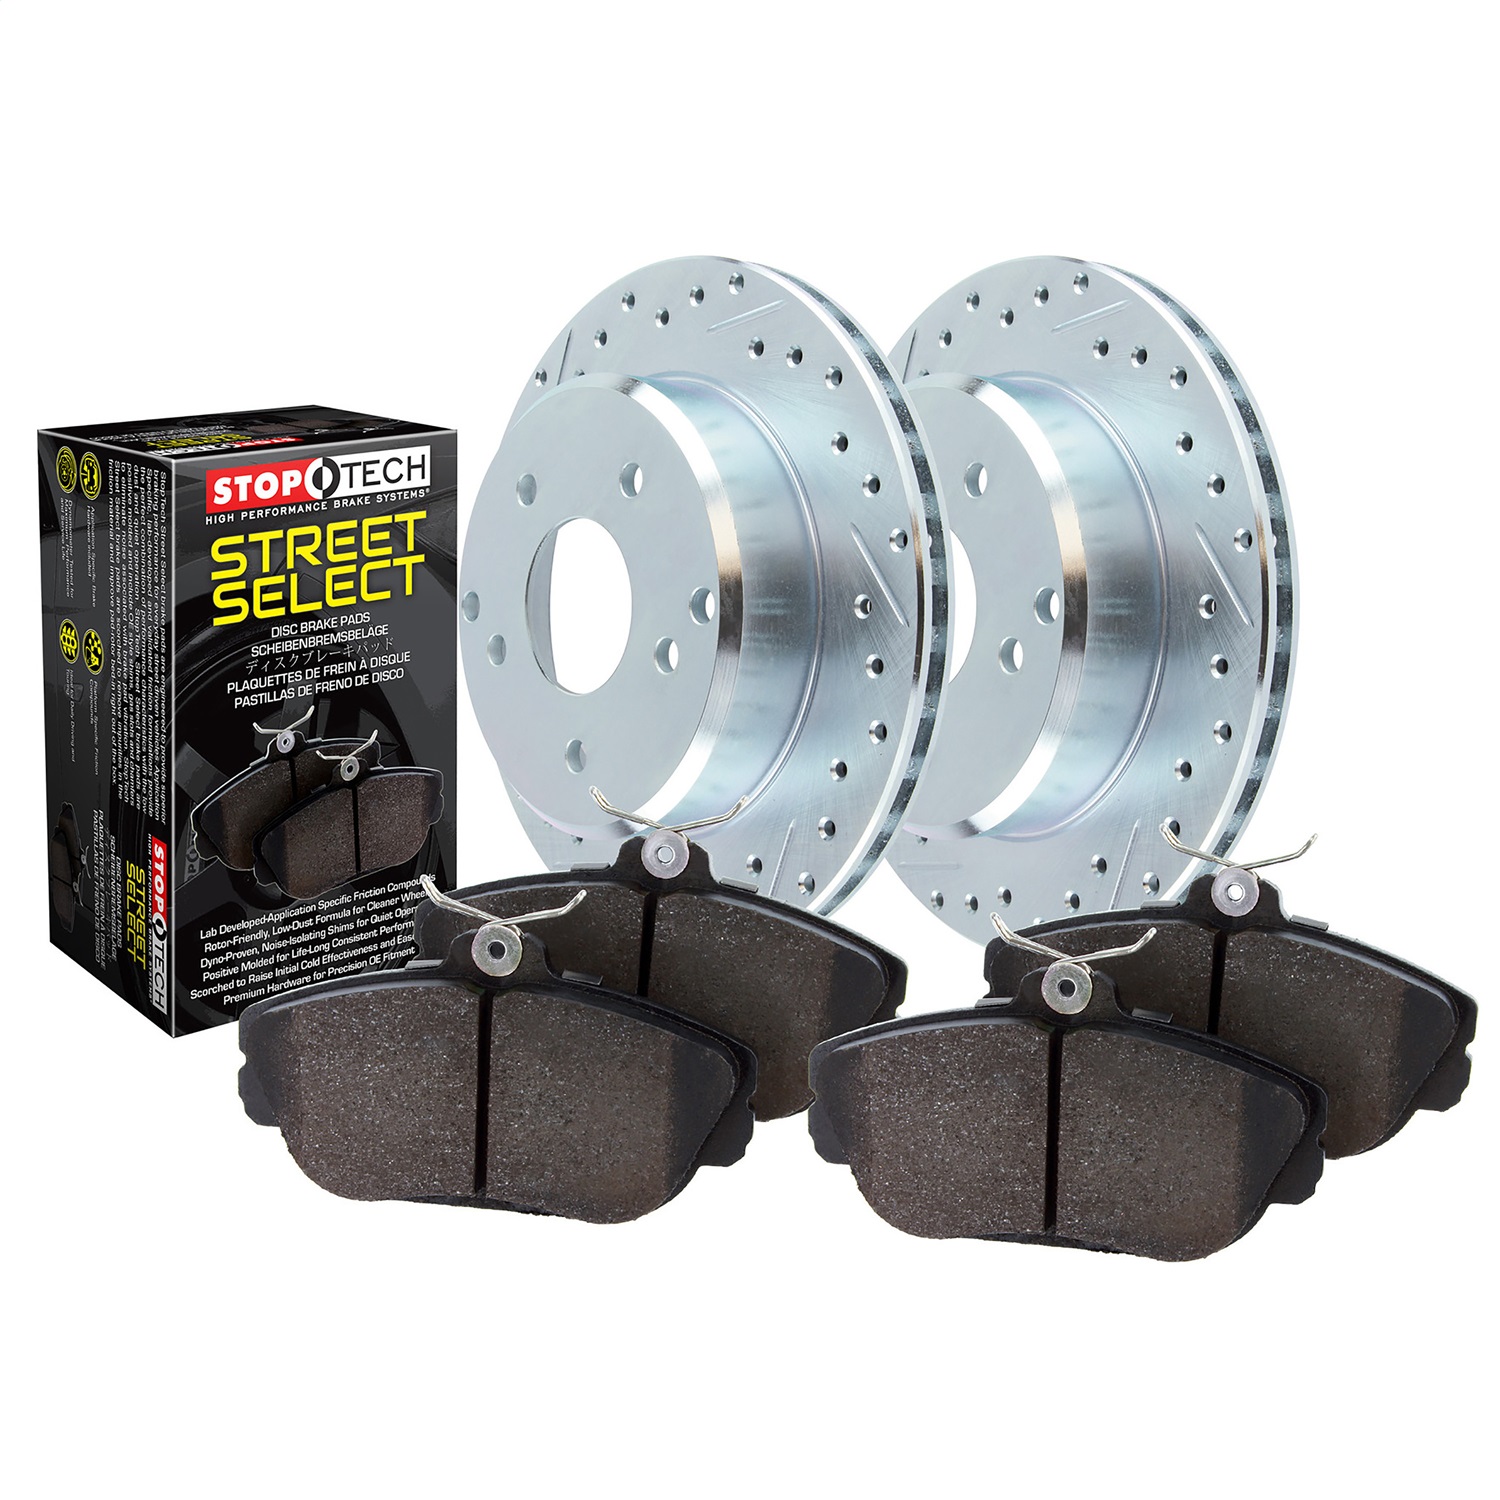 StopTech 928.61515 Select - 2 Wheel Brake Kit w/Cross-Drilled And Slotted Rotor